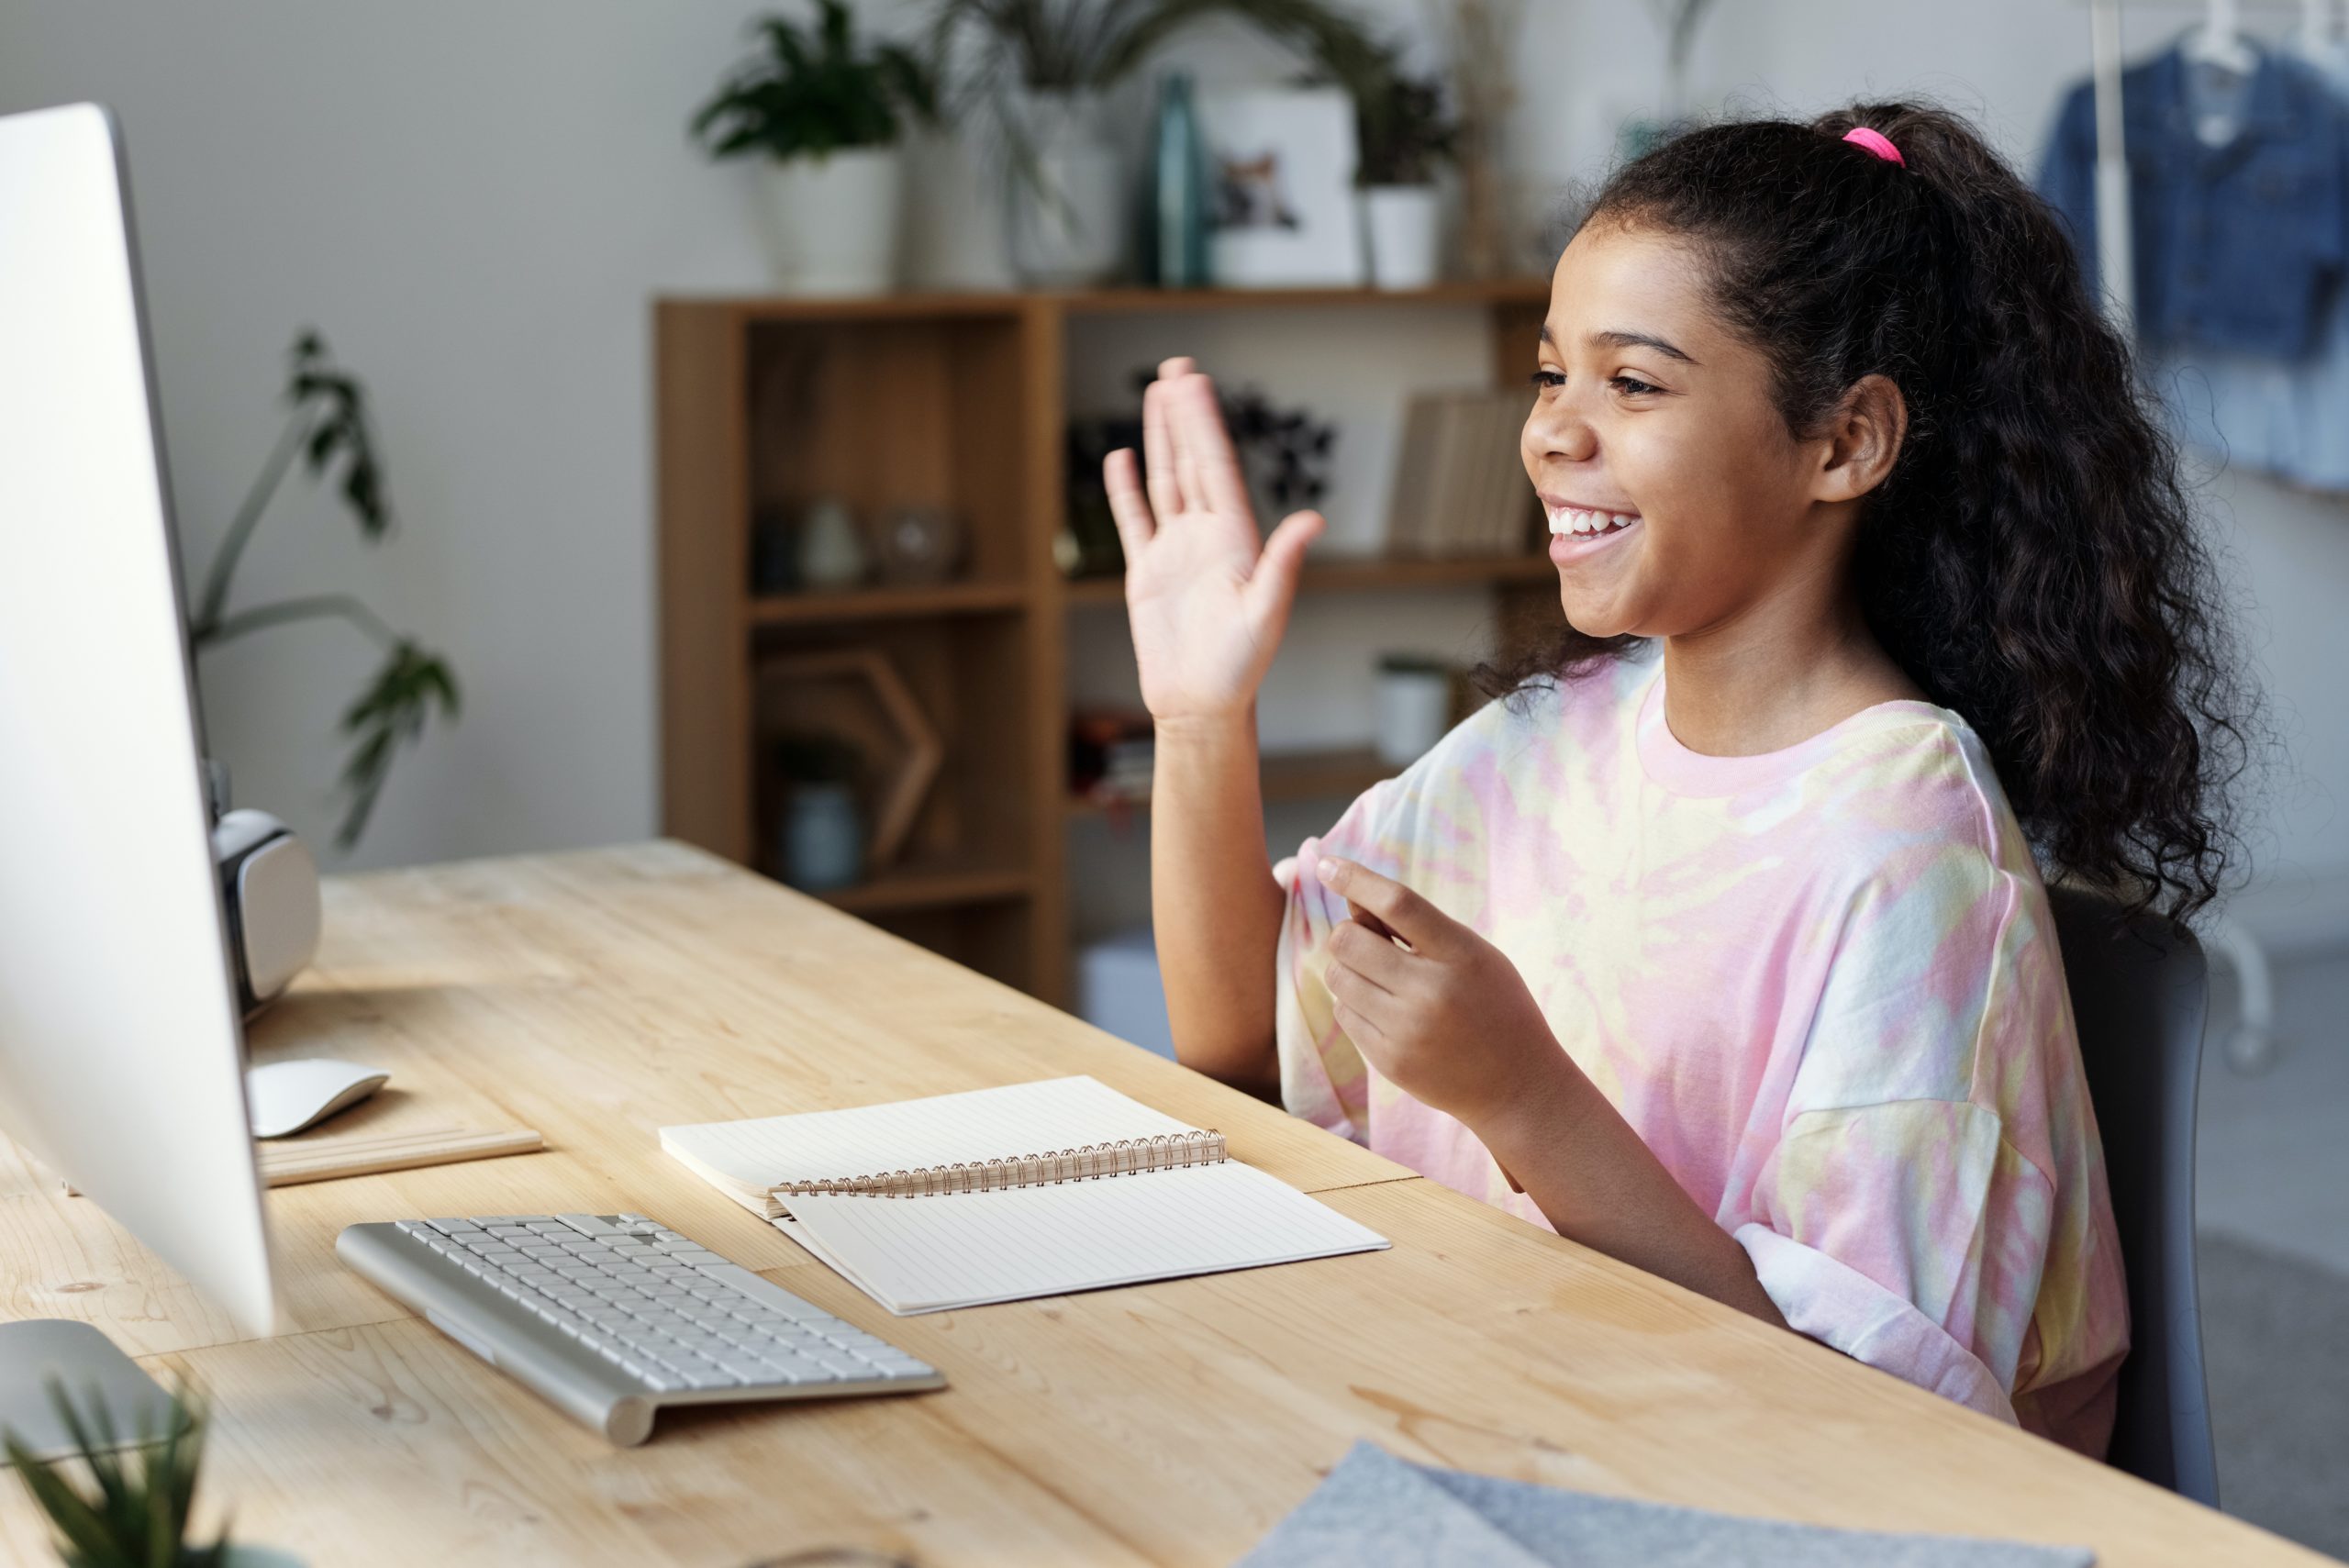 a child waving at her classmates on the computer